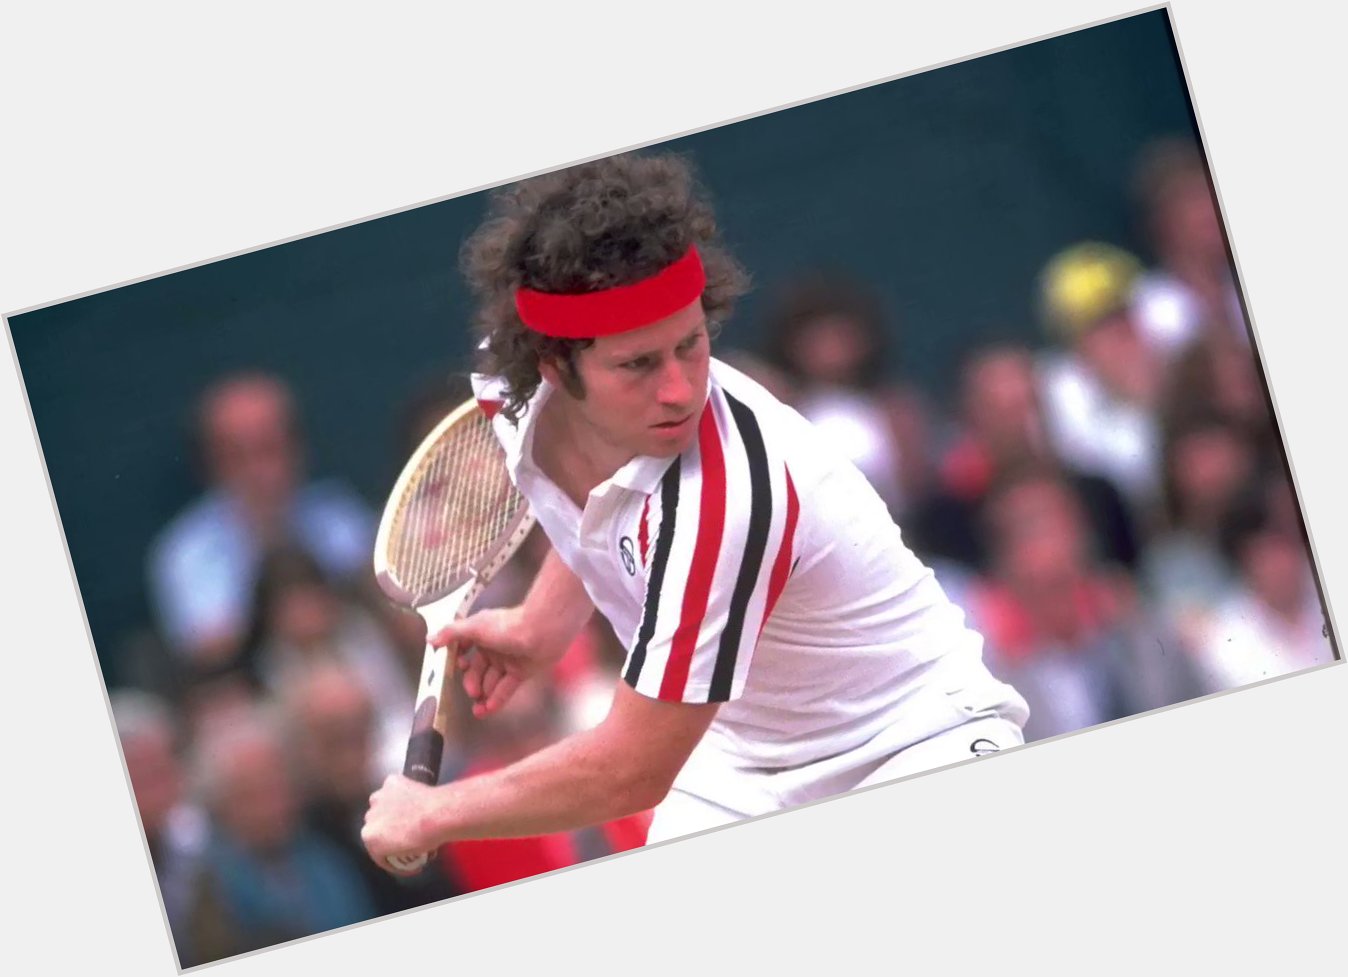 Not one, not two, not three...

Happy Birthday to our 4x singles champion and native New Yorker, John McEnroe!    